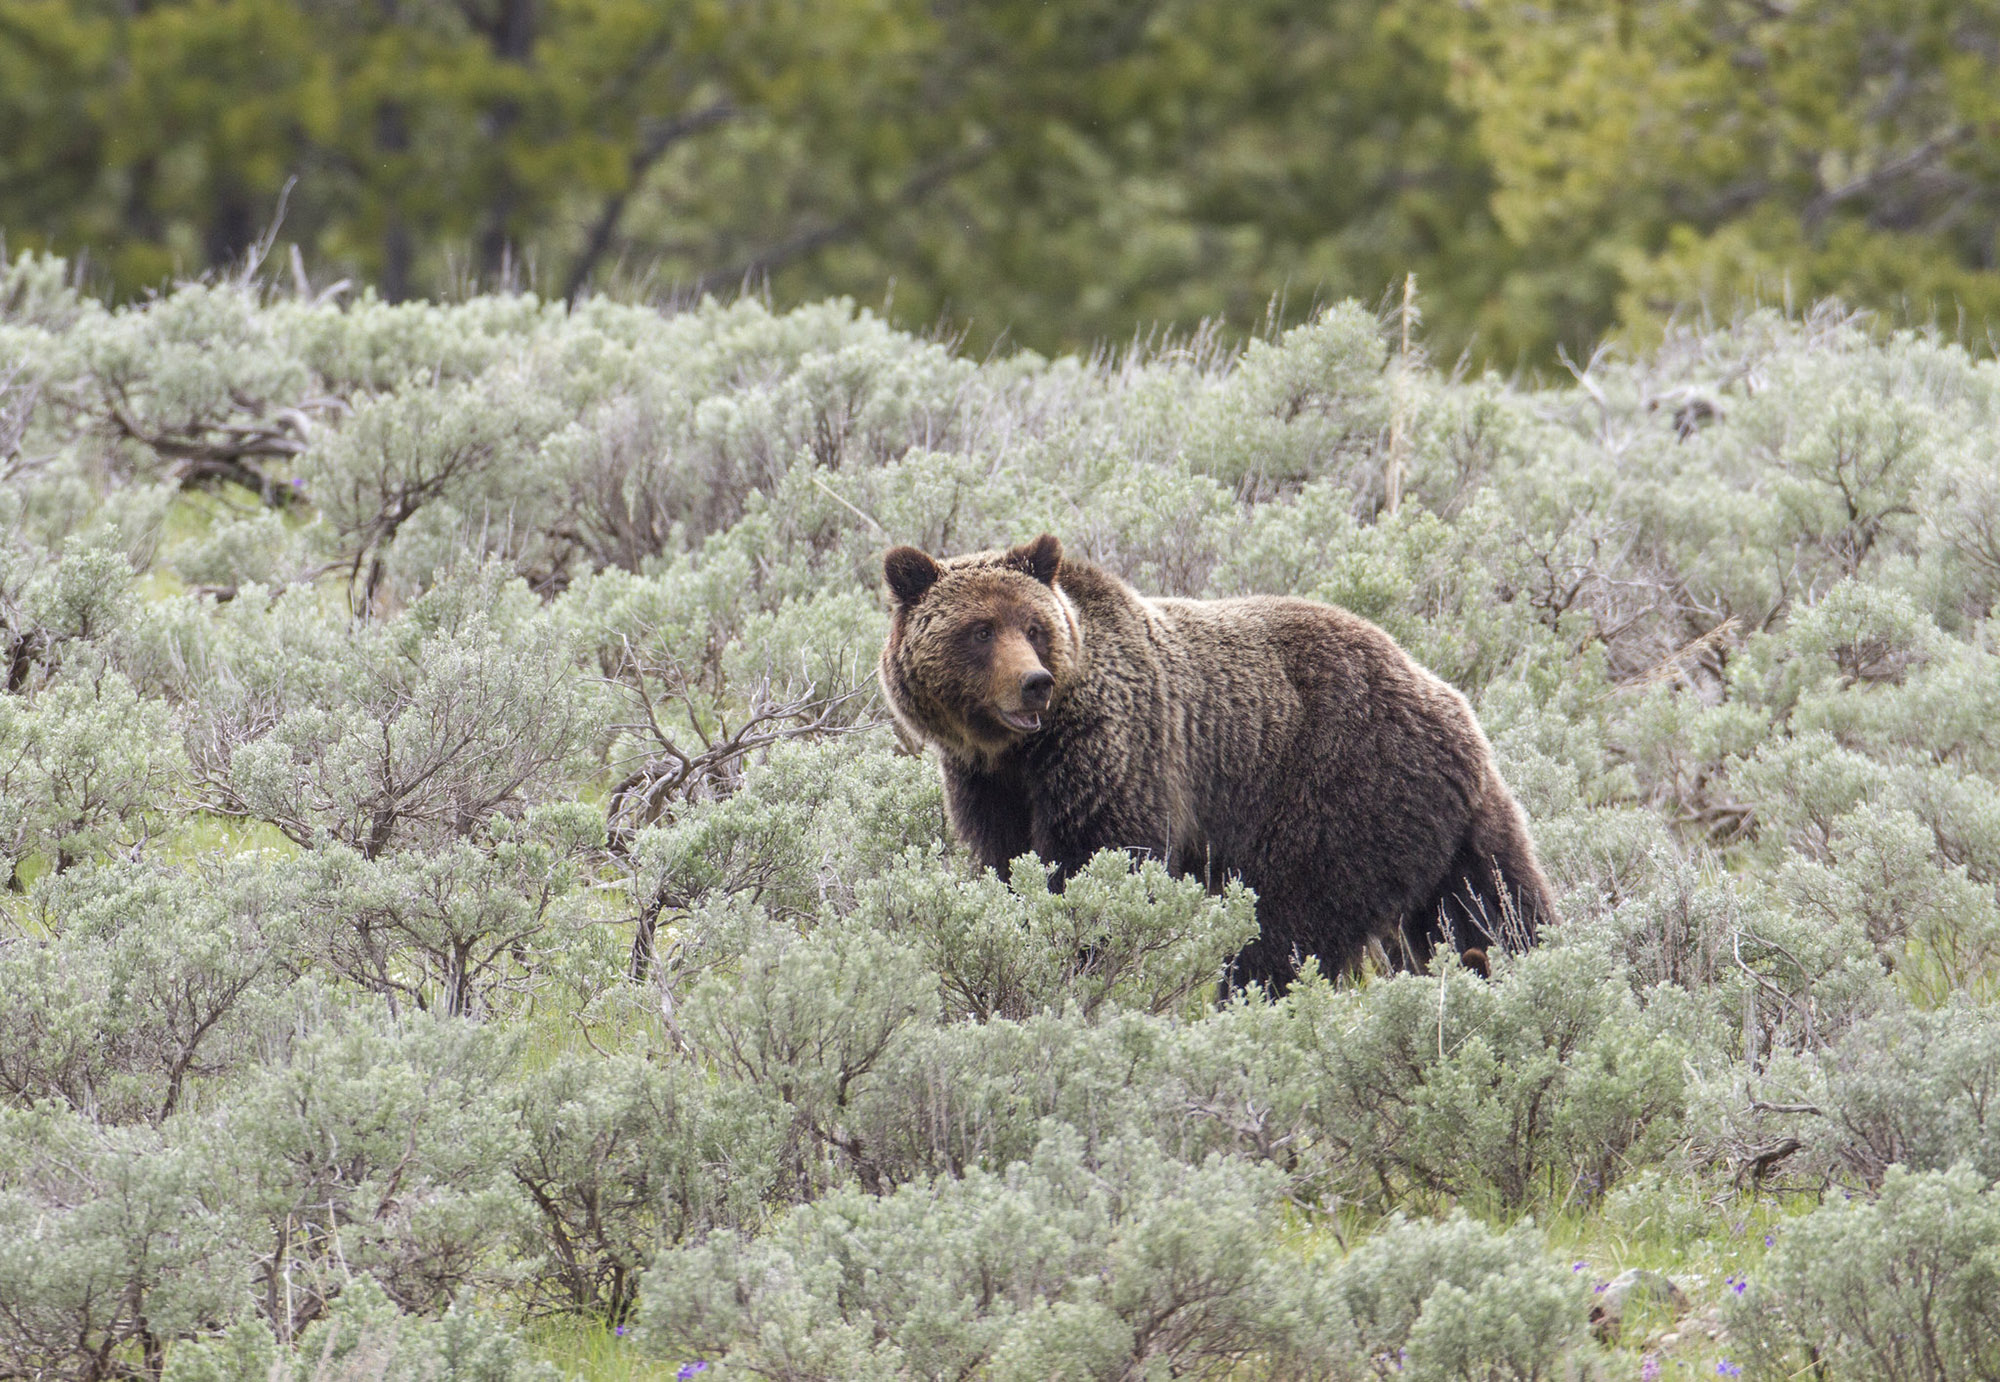 A grizzly bear in the Yellowstone ecosystem.